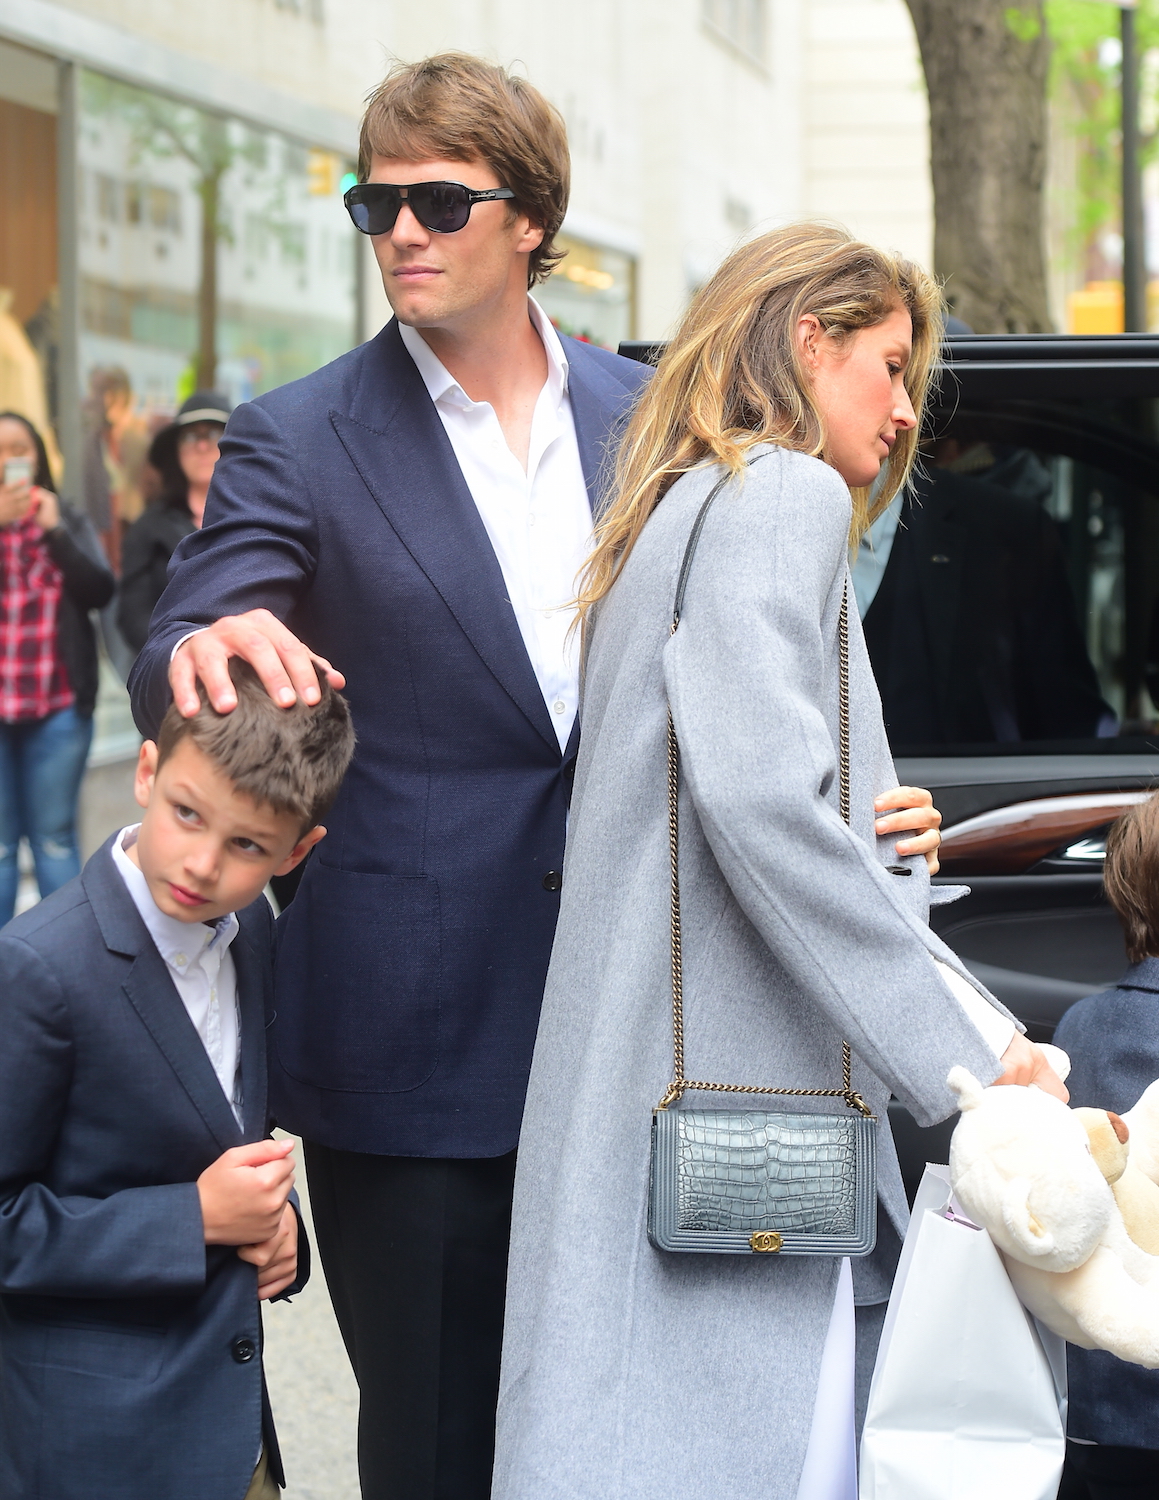 Tom Brady and Gisele on a family outing with the kids in New York (Photo credit: Splash News)